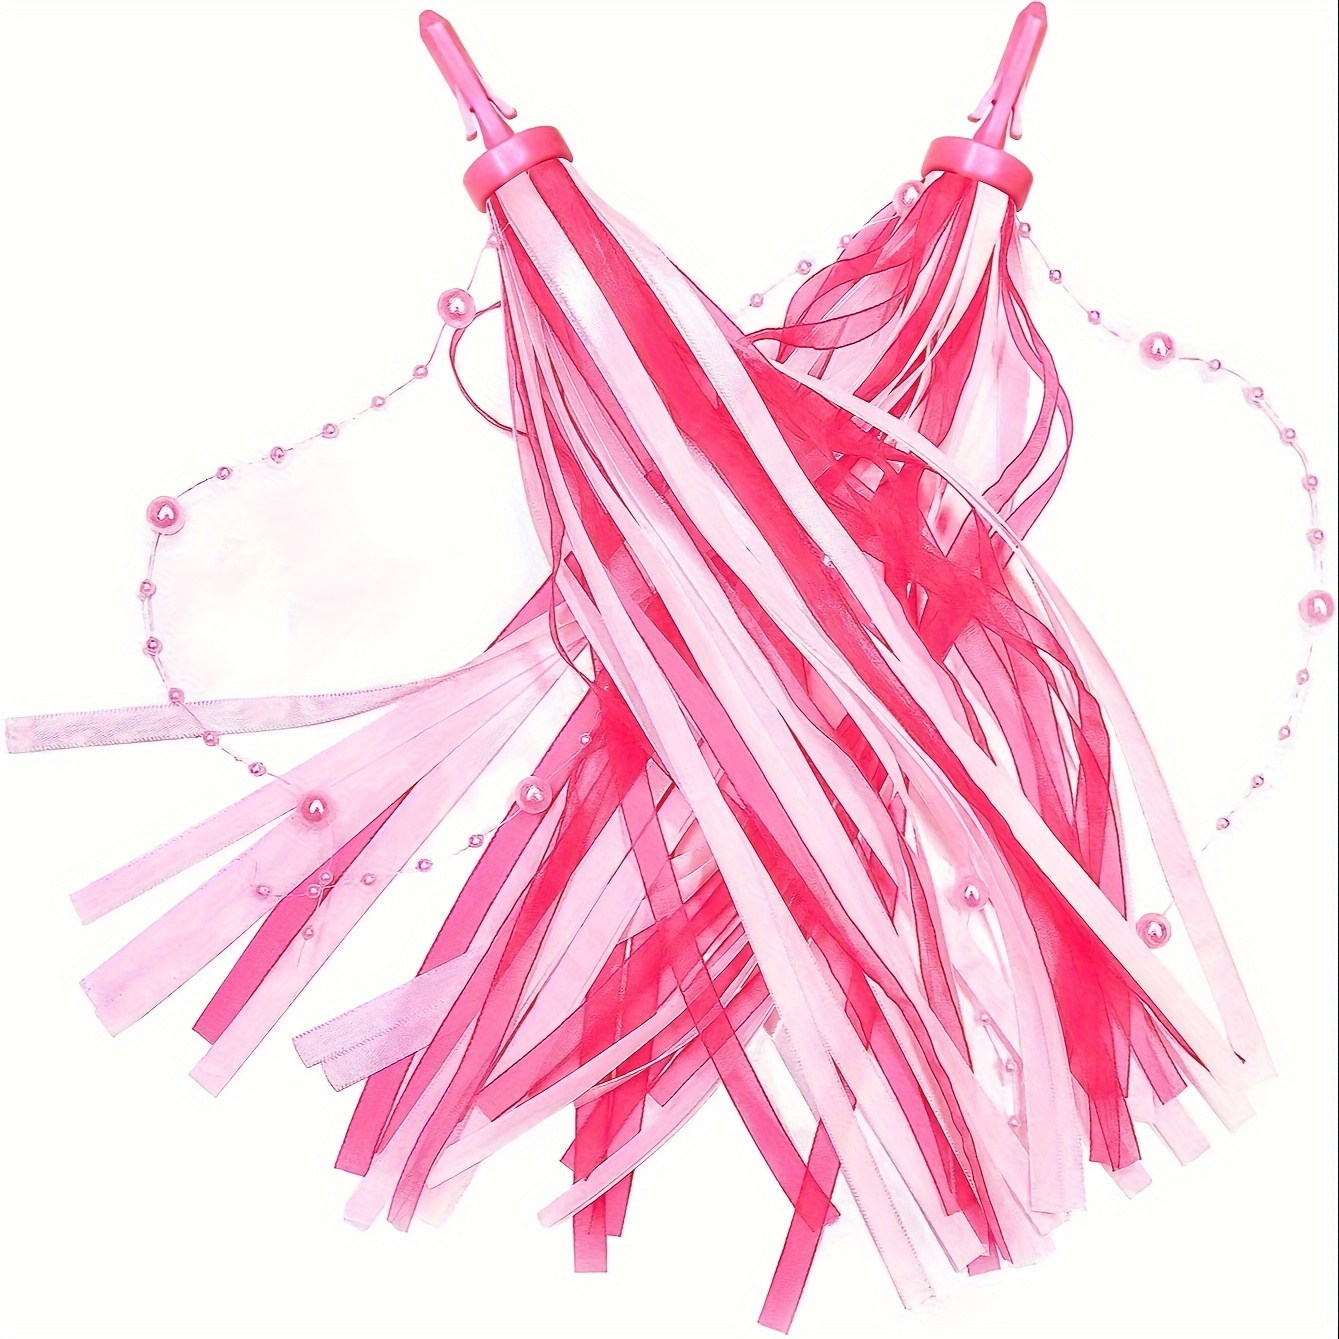 

Pink Beaded Handlebar Streamers For Bicycles - Set Of 2, Polyester Tassel Ribbons, Universal Bike Accessories For All Seasons, Suitable For Ages 14 & Up